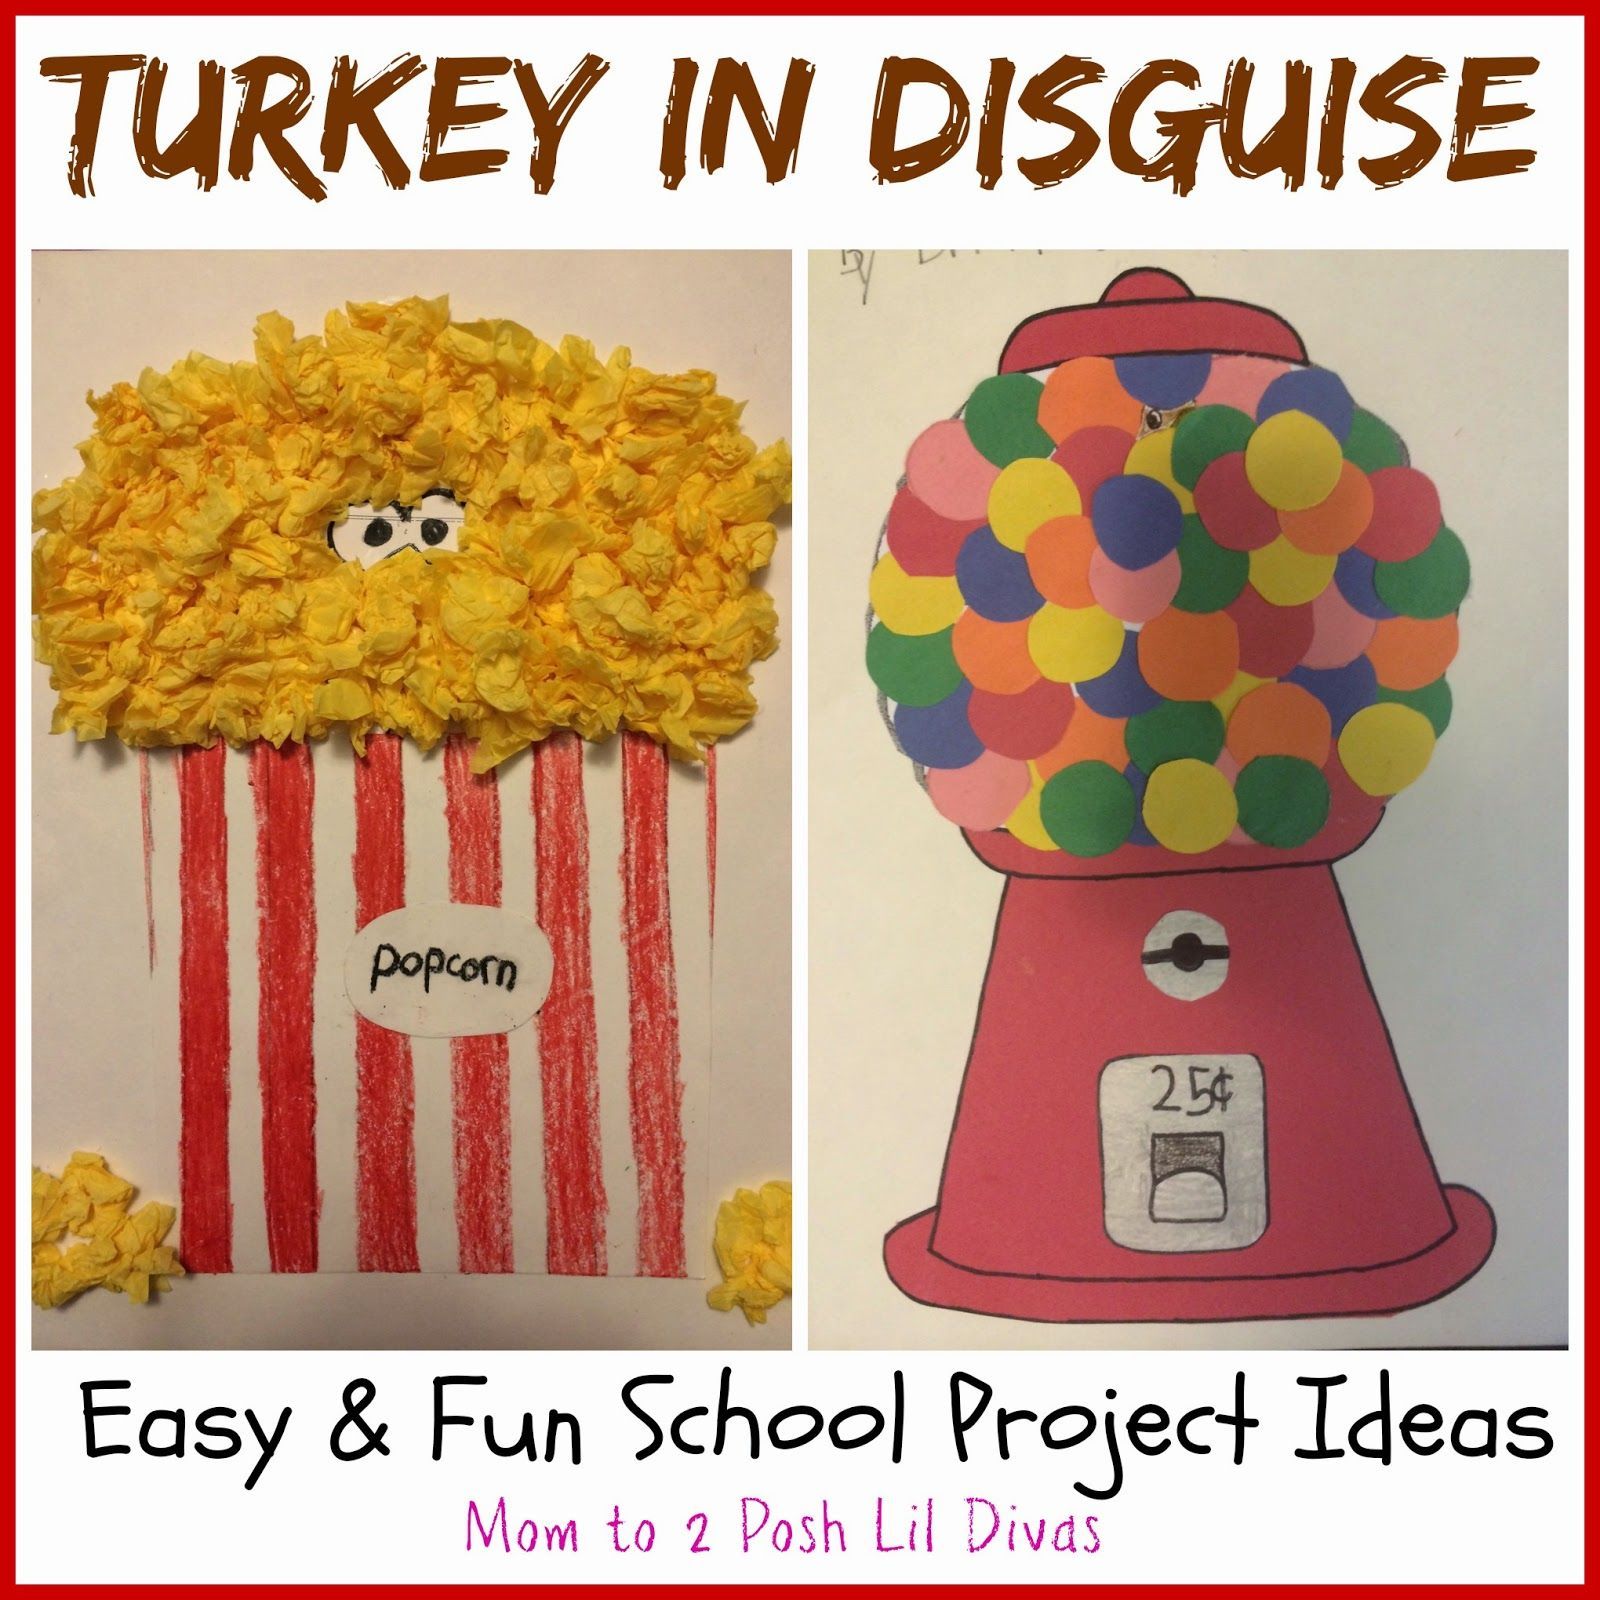 Easy and Fun Turkey in Disguise Projects -   14 disguise a turkey project boy easy ideas